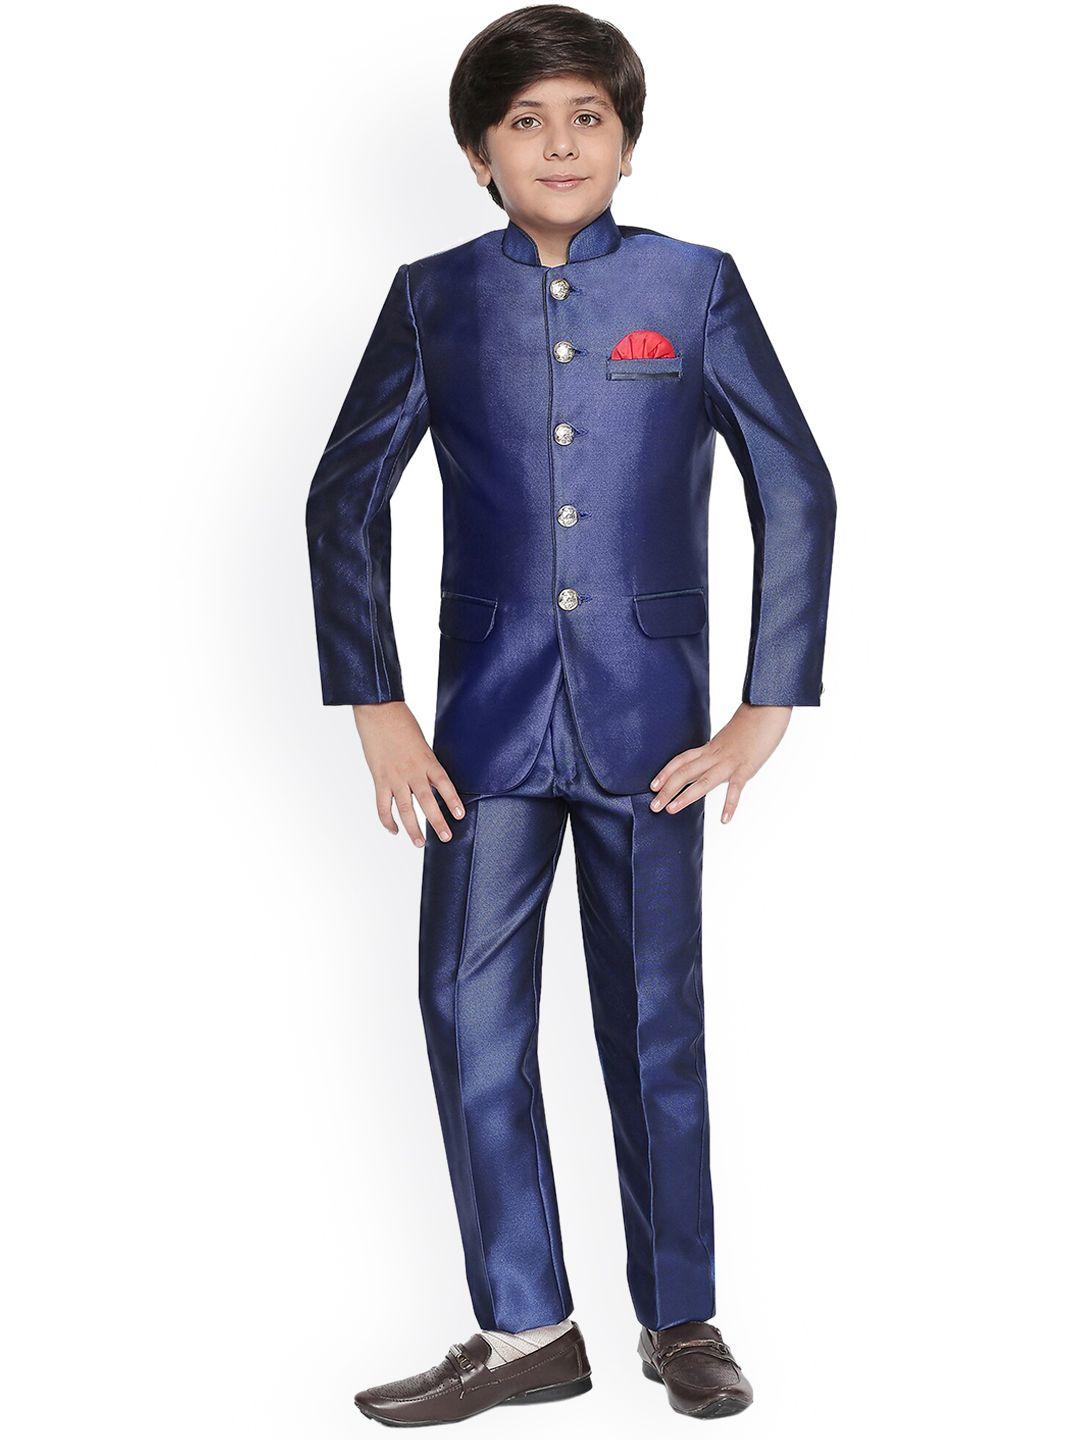 jeetethnics boys navy blue solid 2-piece single-breasted partywear suit